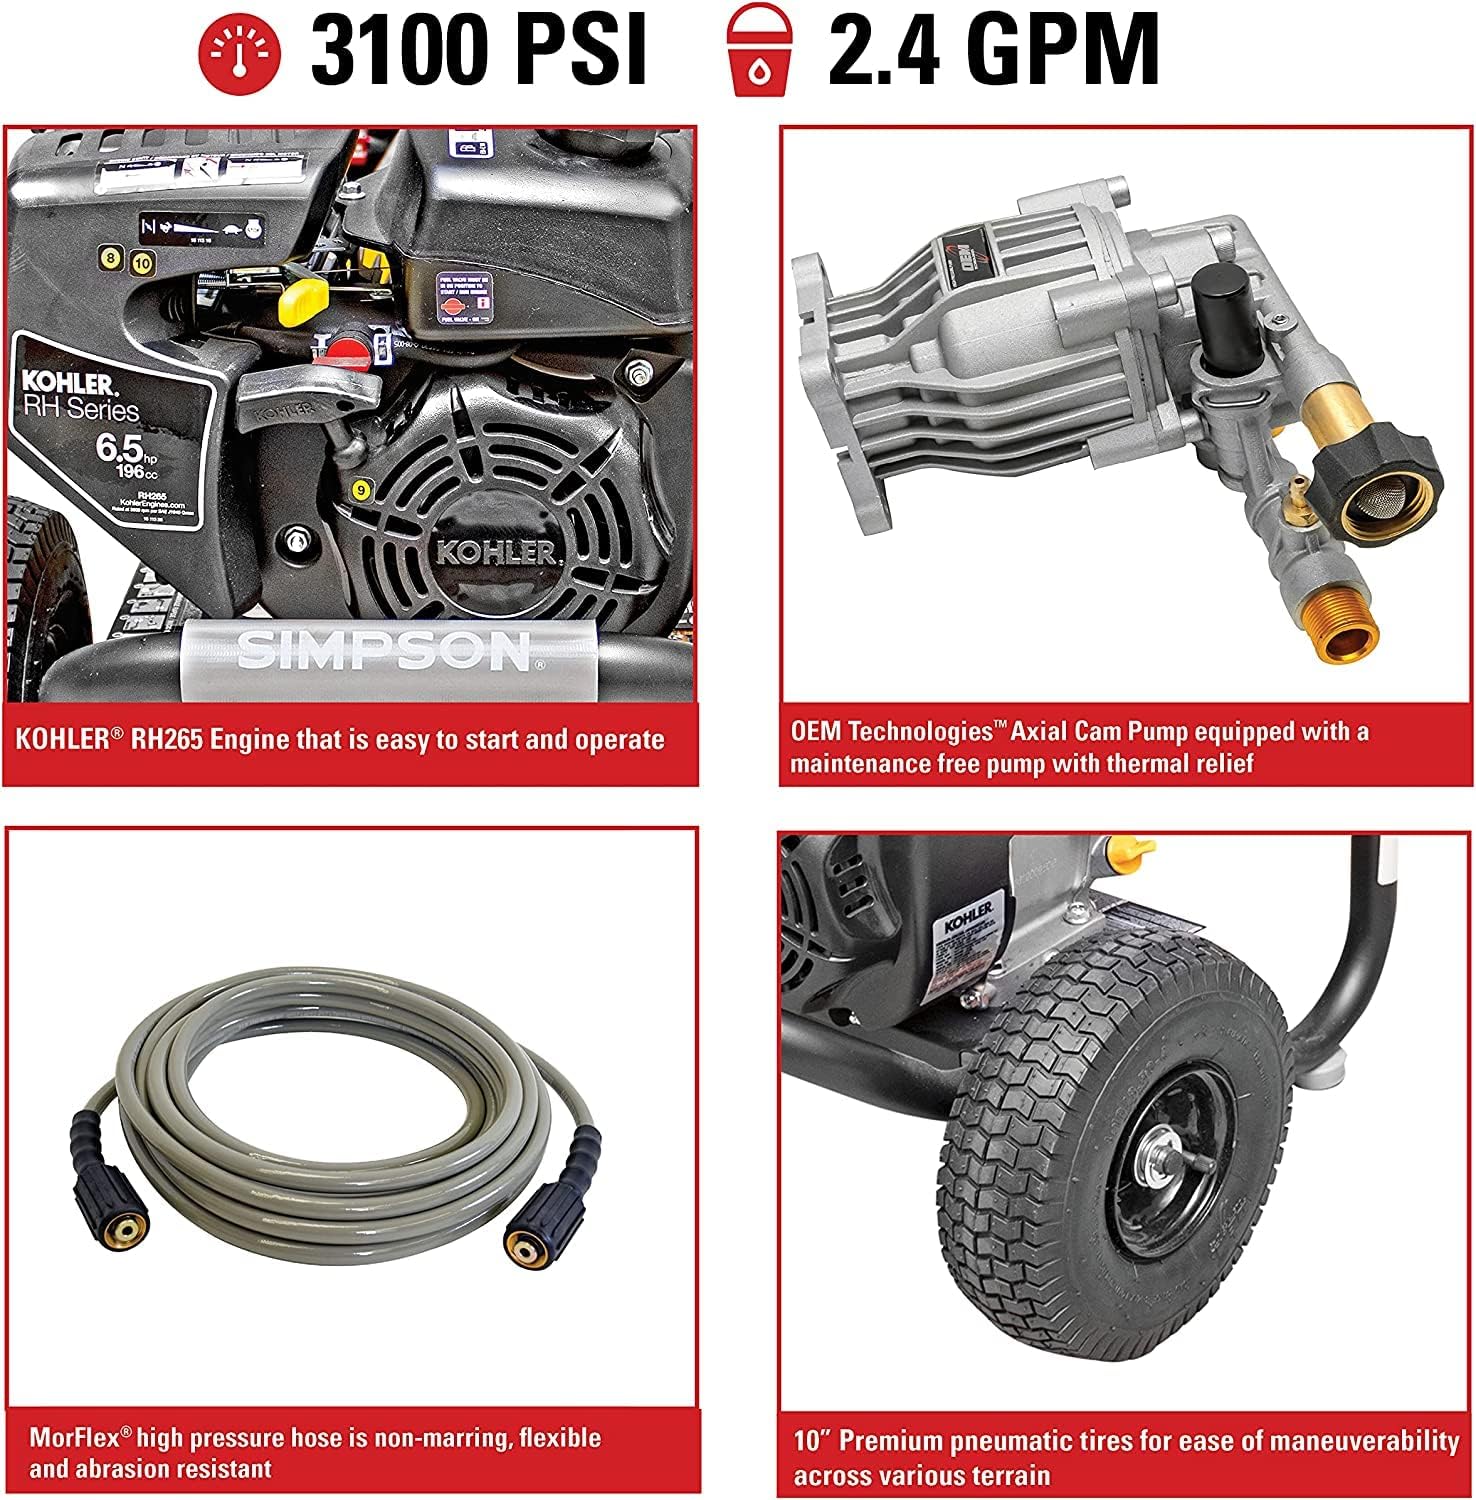 SIMPSON Cleaning MS60763-S MegaShot 3100 PSI Gas Pressure Washer, 2.4 GPM, Kohler RH265 Engine, Includes Spray Gun and Extension Wand, 5 QC Nozzle Tips, 1/4-in. x 25-ft. MorFlex Hose Pressure Washer 3100 PSI Honda RH265 (Refurbished)